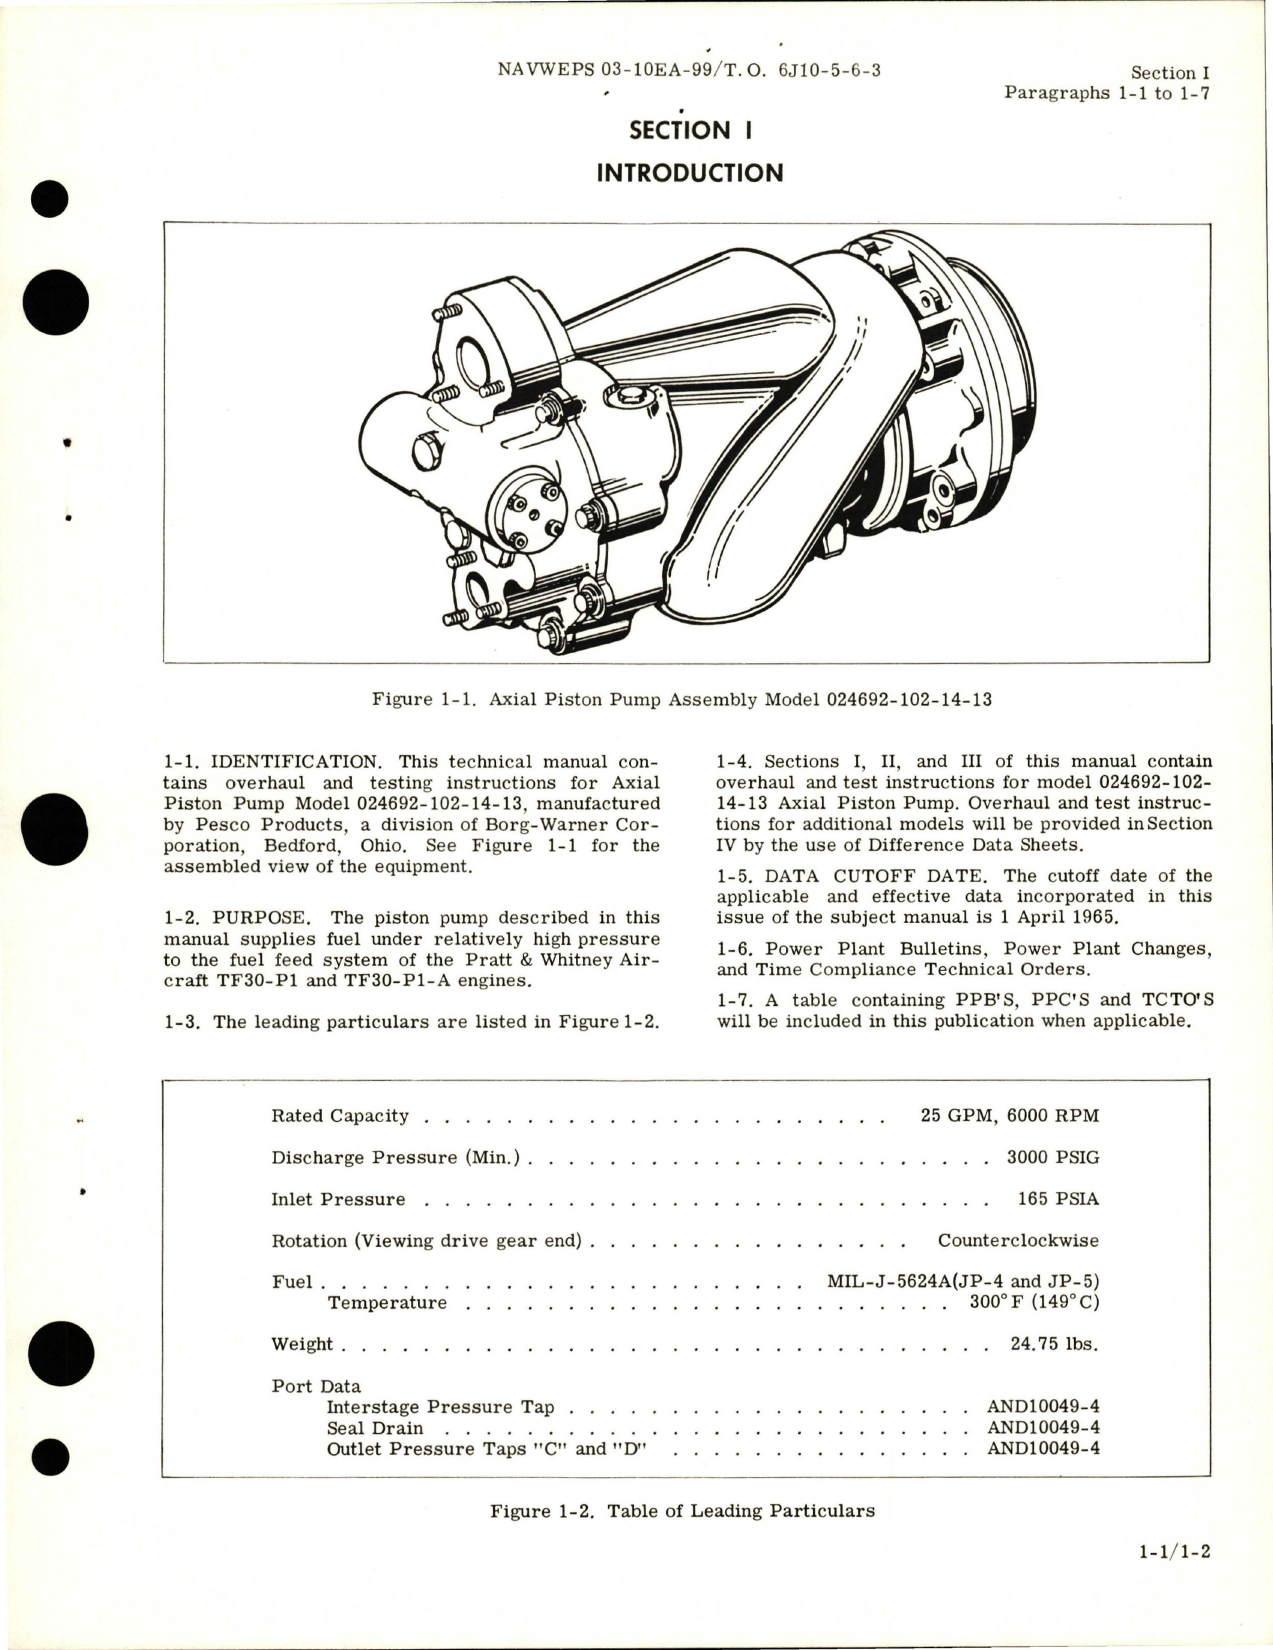 Sample page 5 from AirCorps Library document: Overhaul Instructions for Axial Piston Pump Assembly - 024692-102-14-13